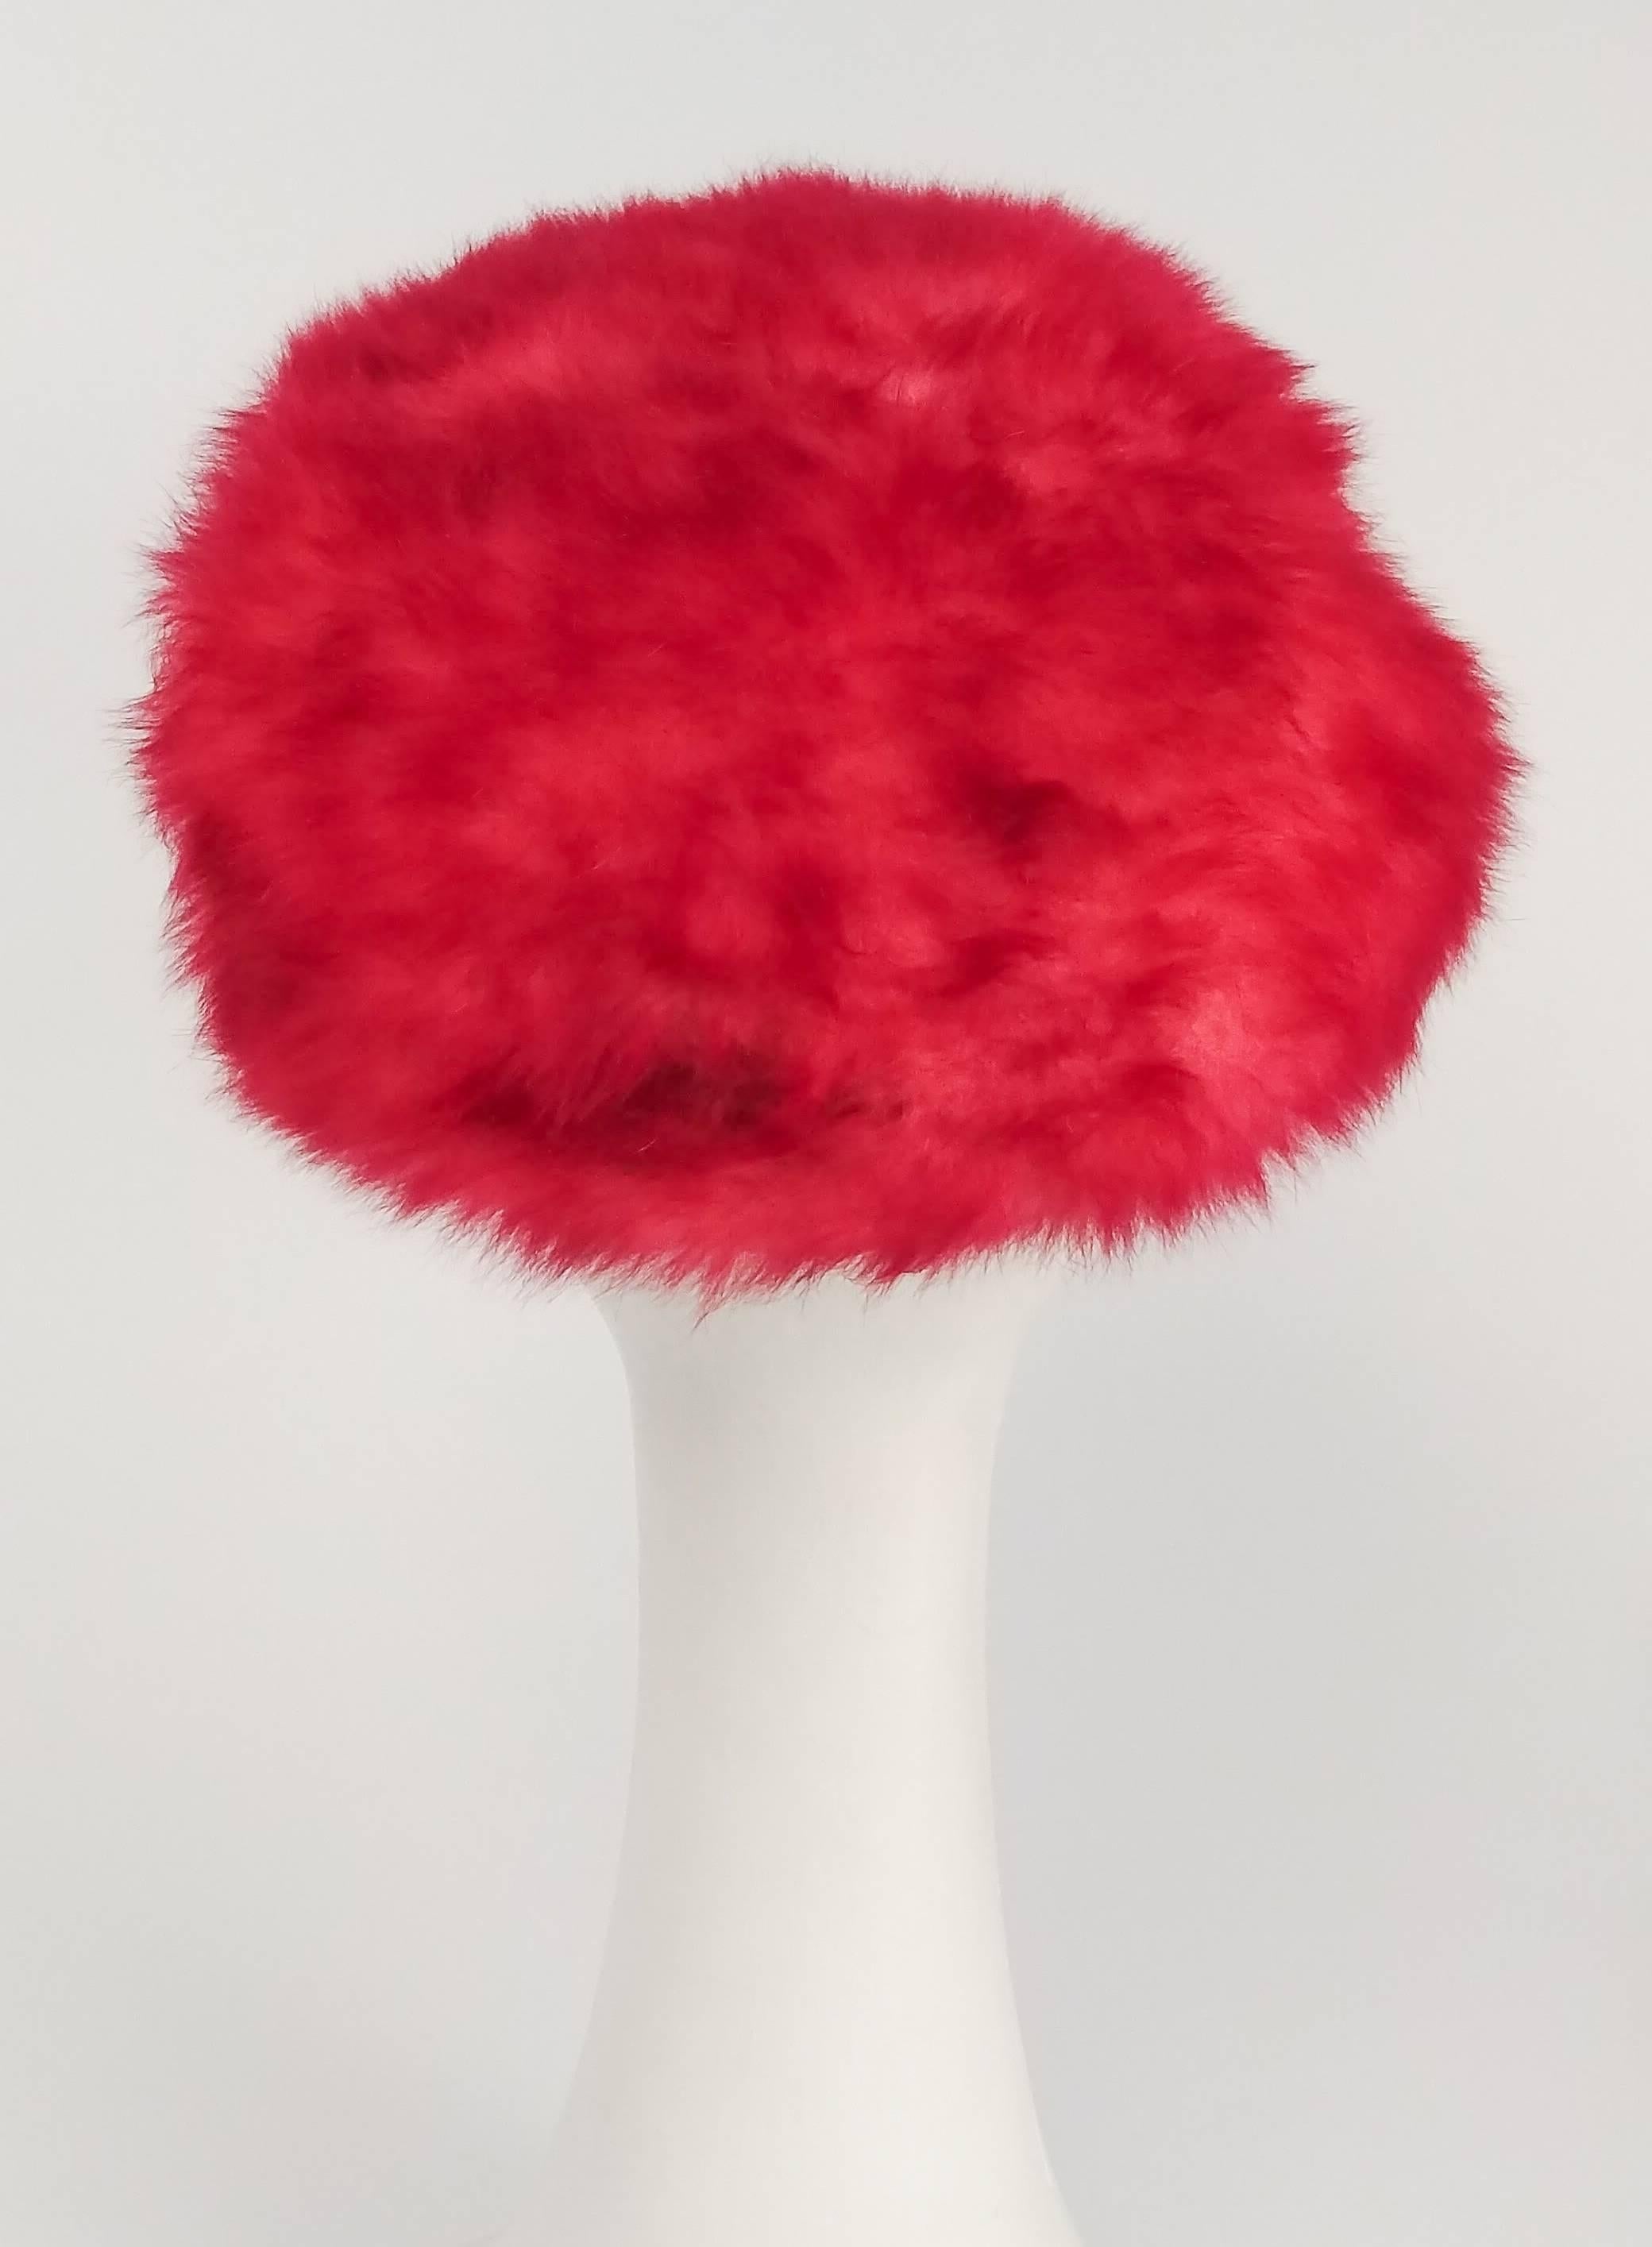 pink furry hat